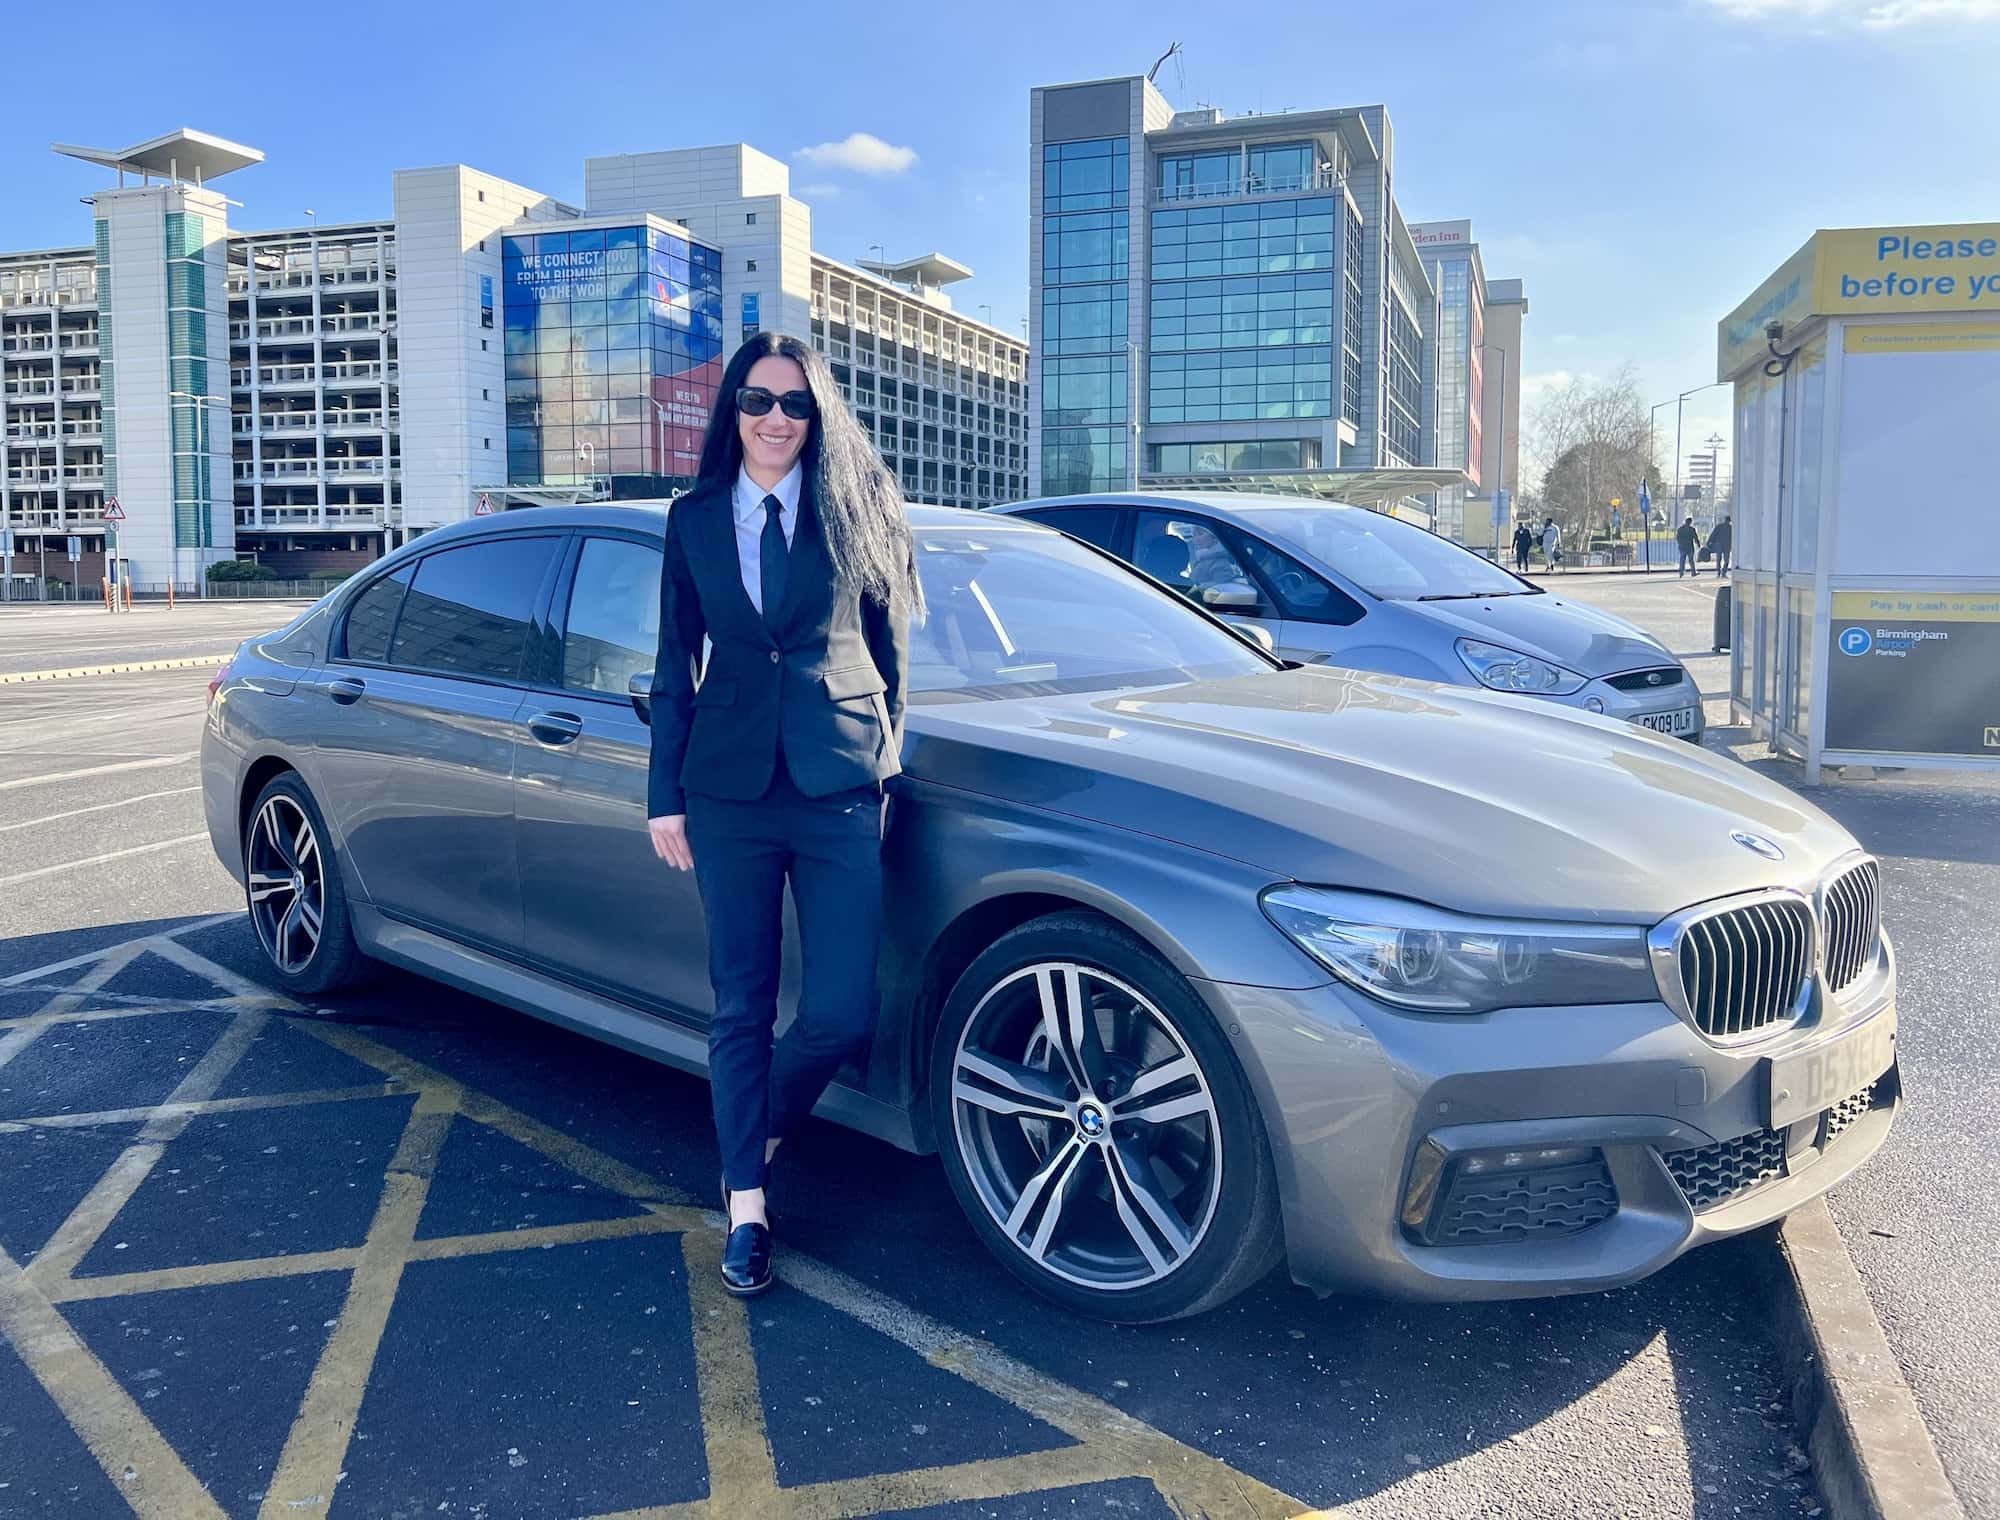 Our Female Chauffeur with the BMW 7 Series at Birmingham Airport